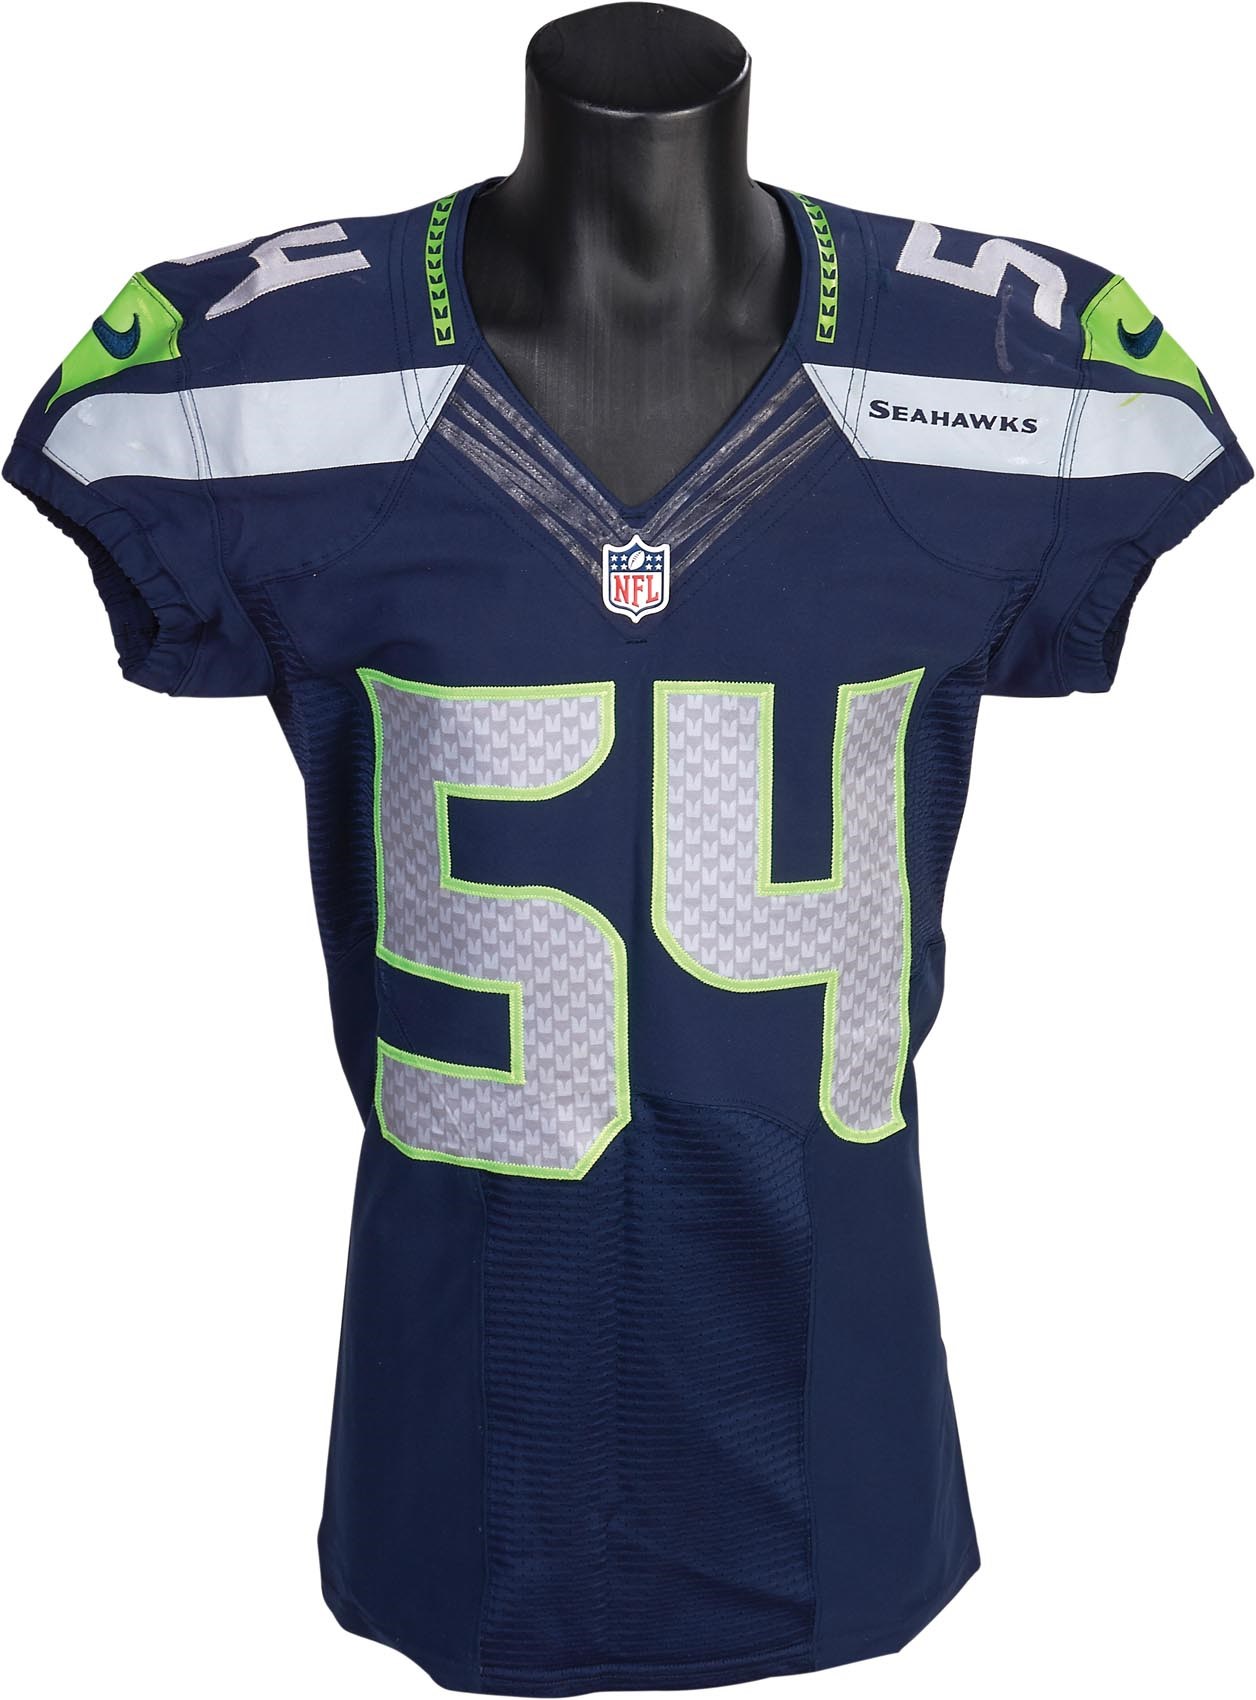 - 2012 Bobby Wagner Signed Game Worn Seahawks Jersey